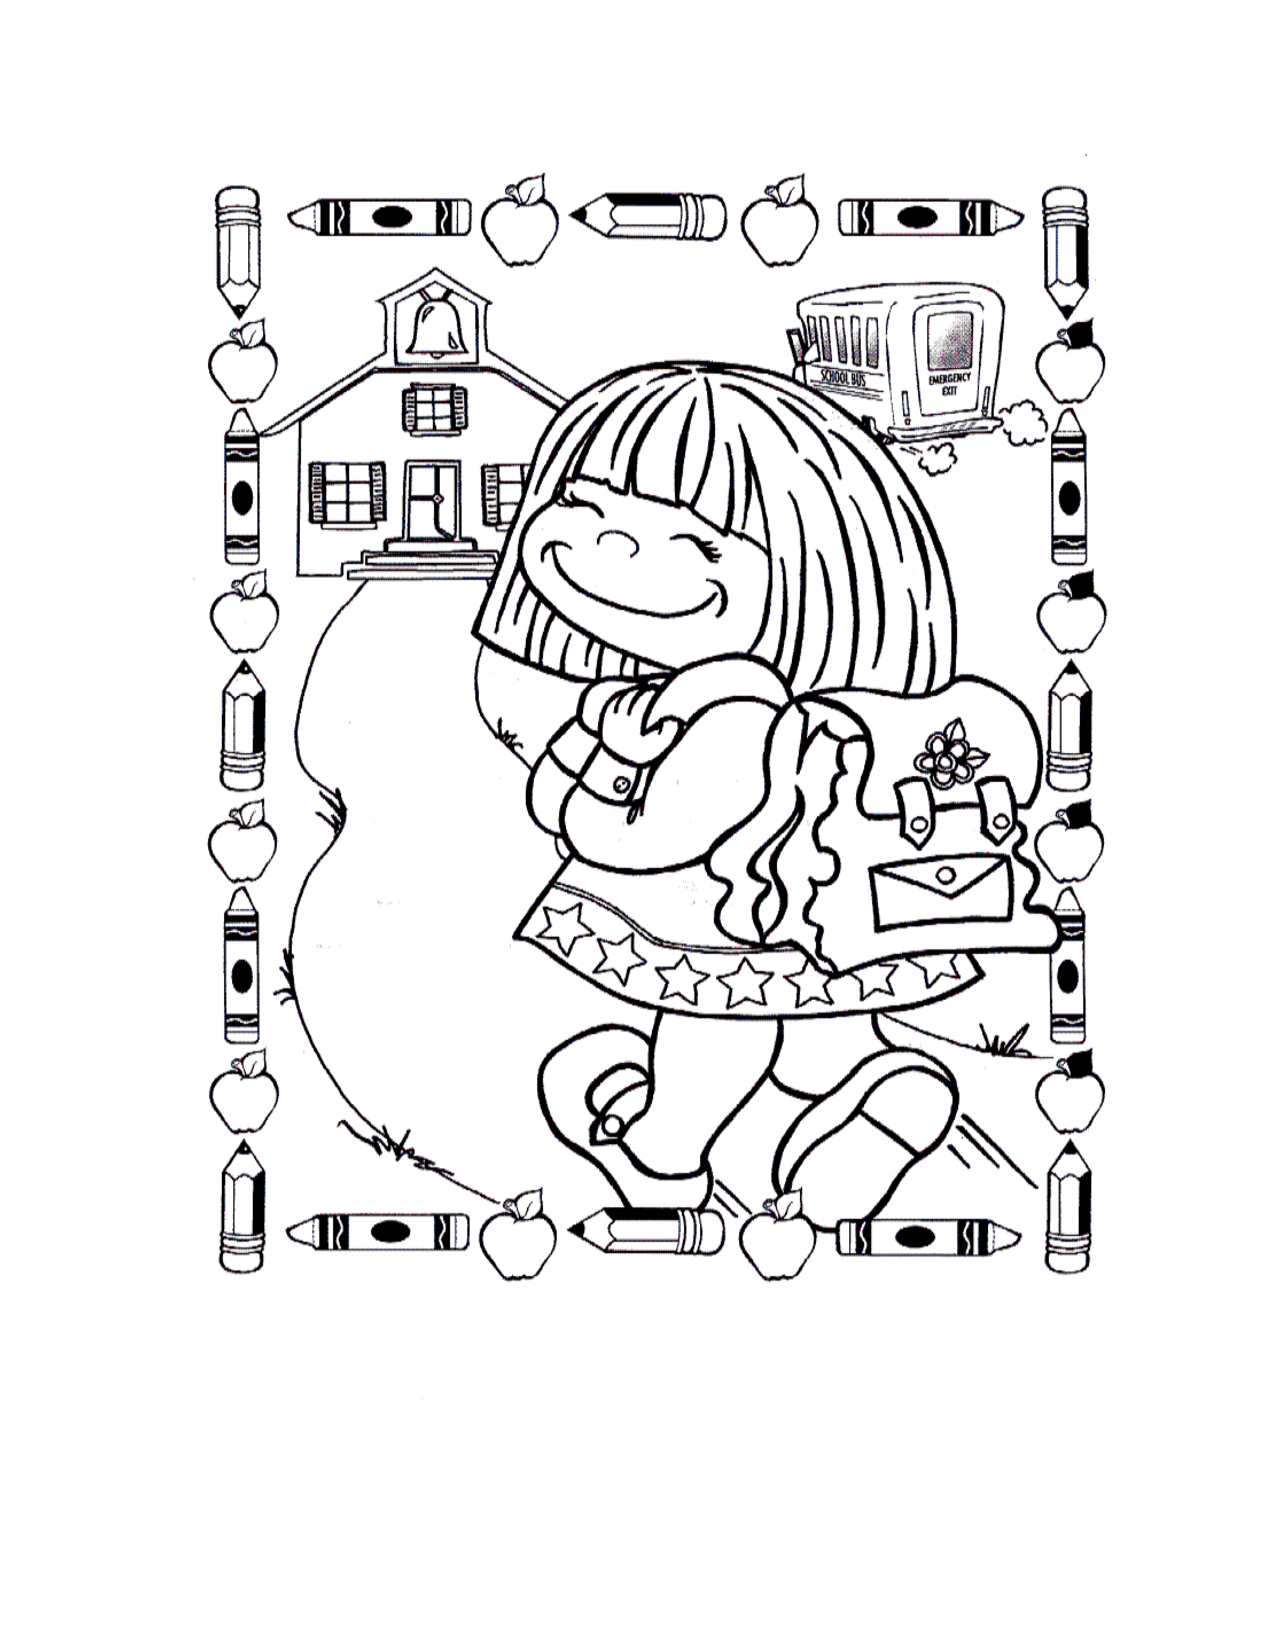 Free Coloring Sheets For First Graders - Coloring